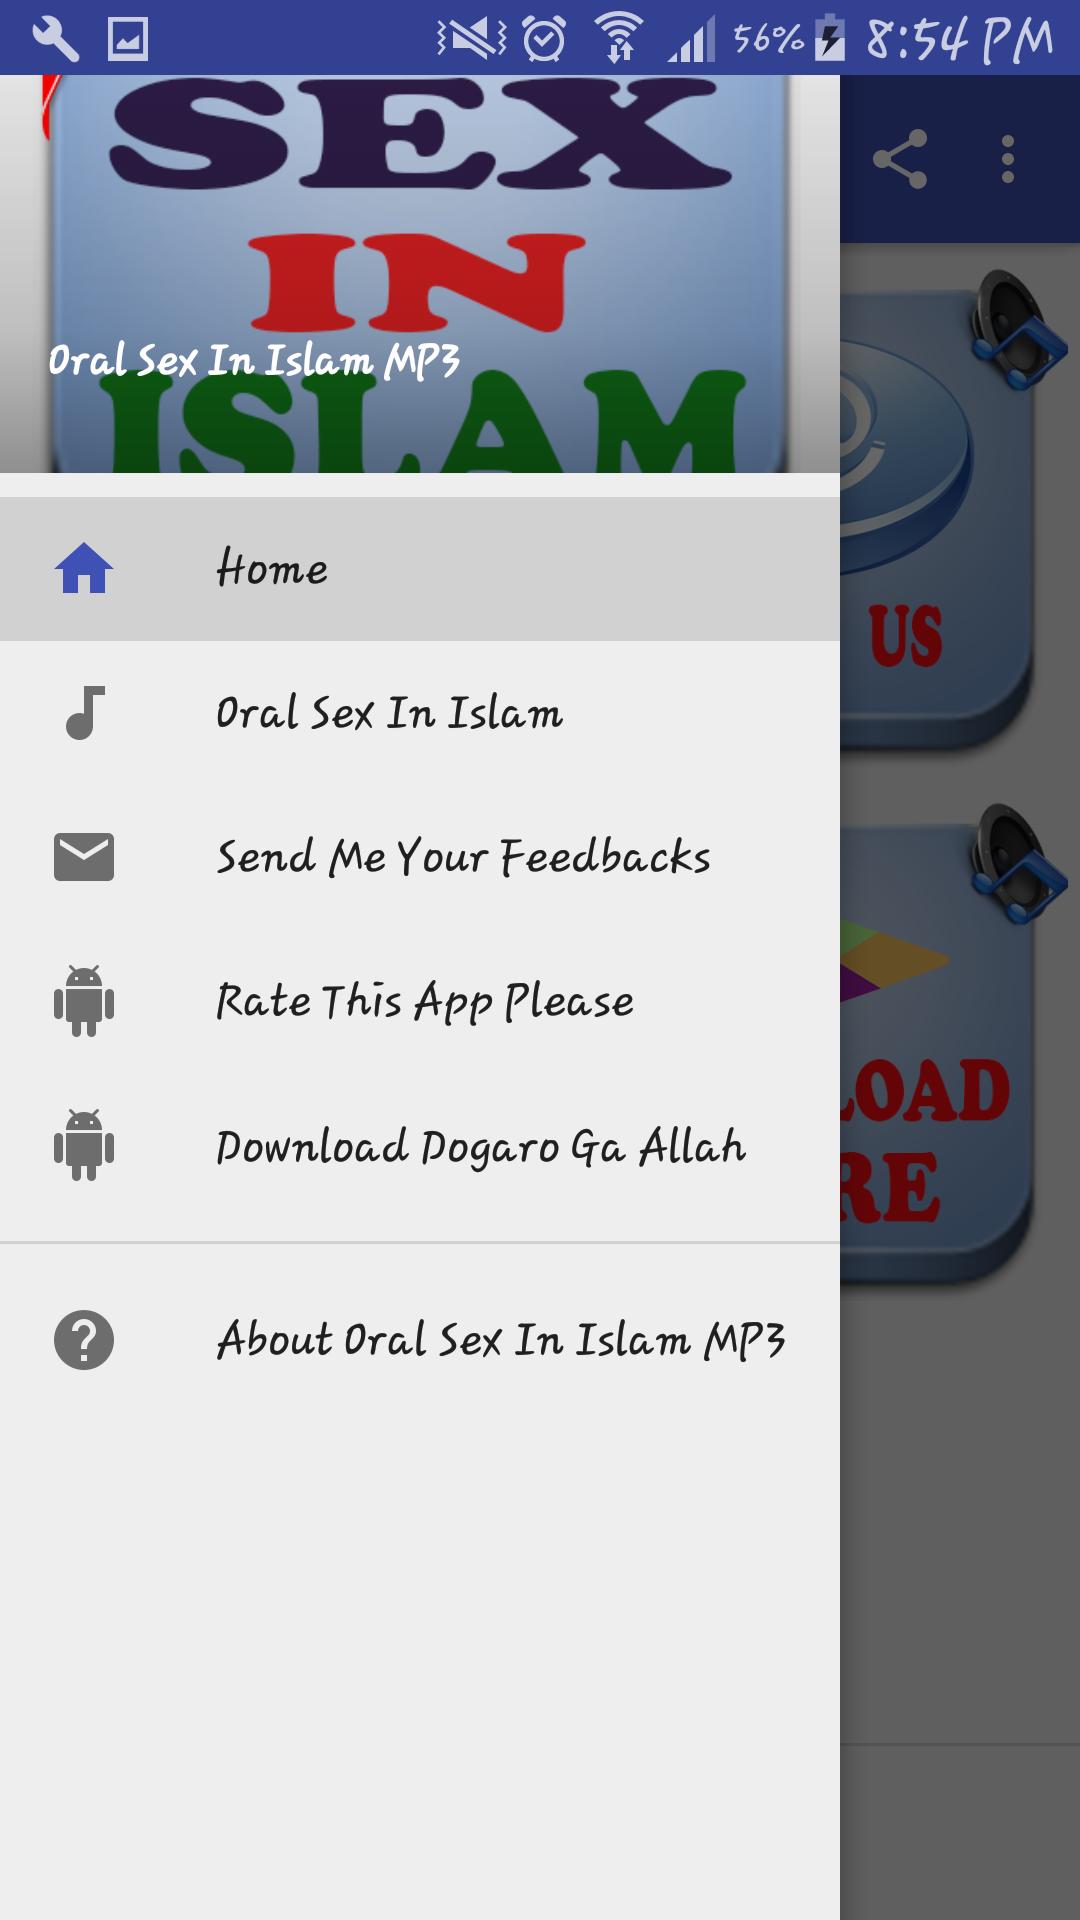 Oral Sex In Islam MP3 for Android - APK Download